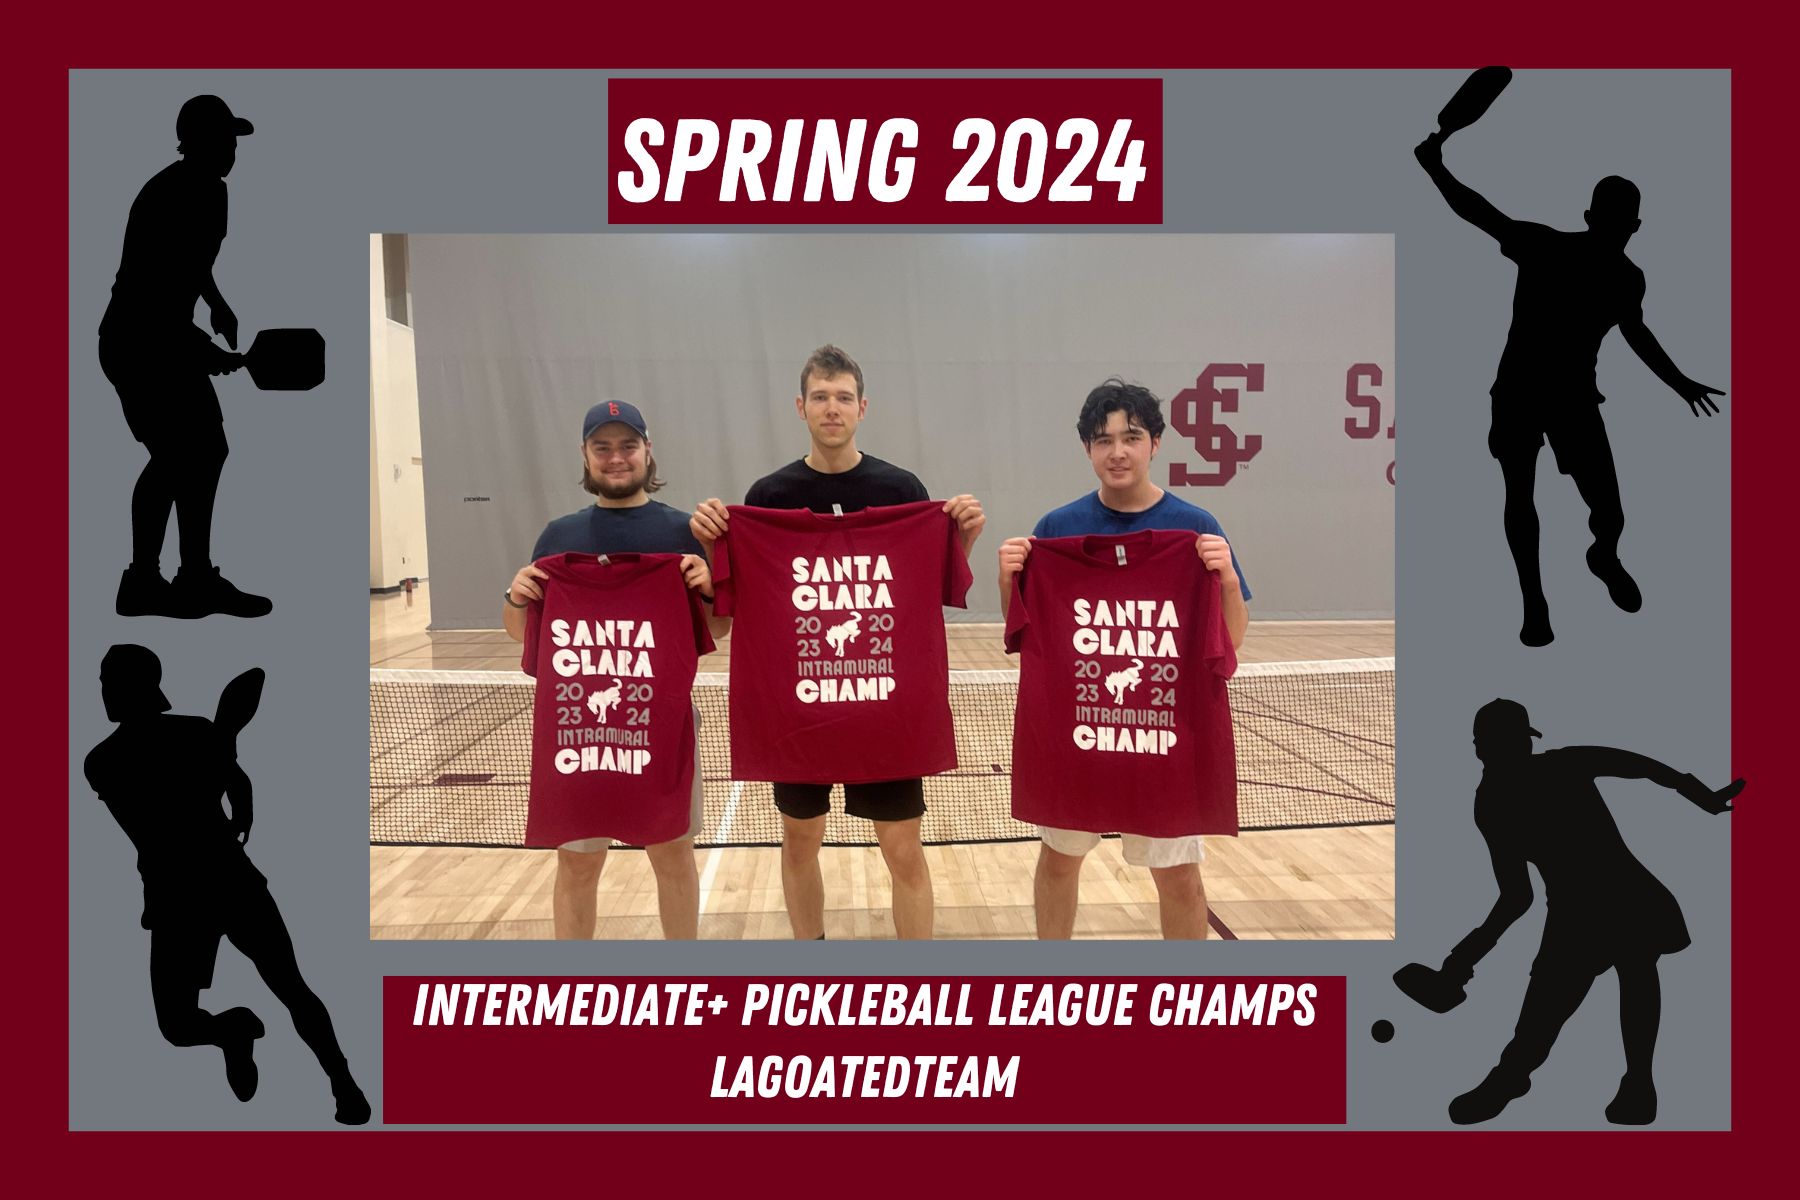 Photo of Lagoatedteam, posing in Malley with their IM Champion shirts after winning the intermediate pickleball league.